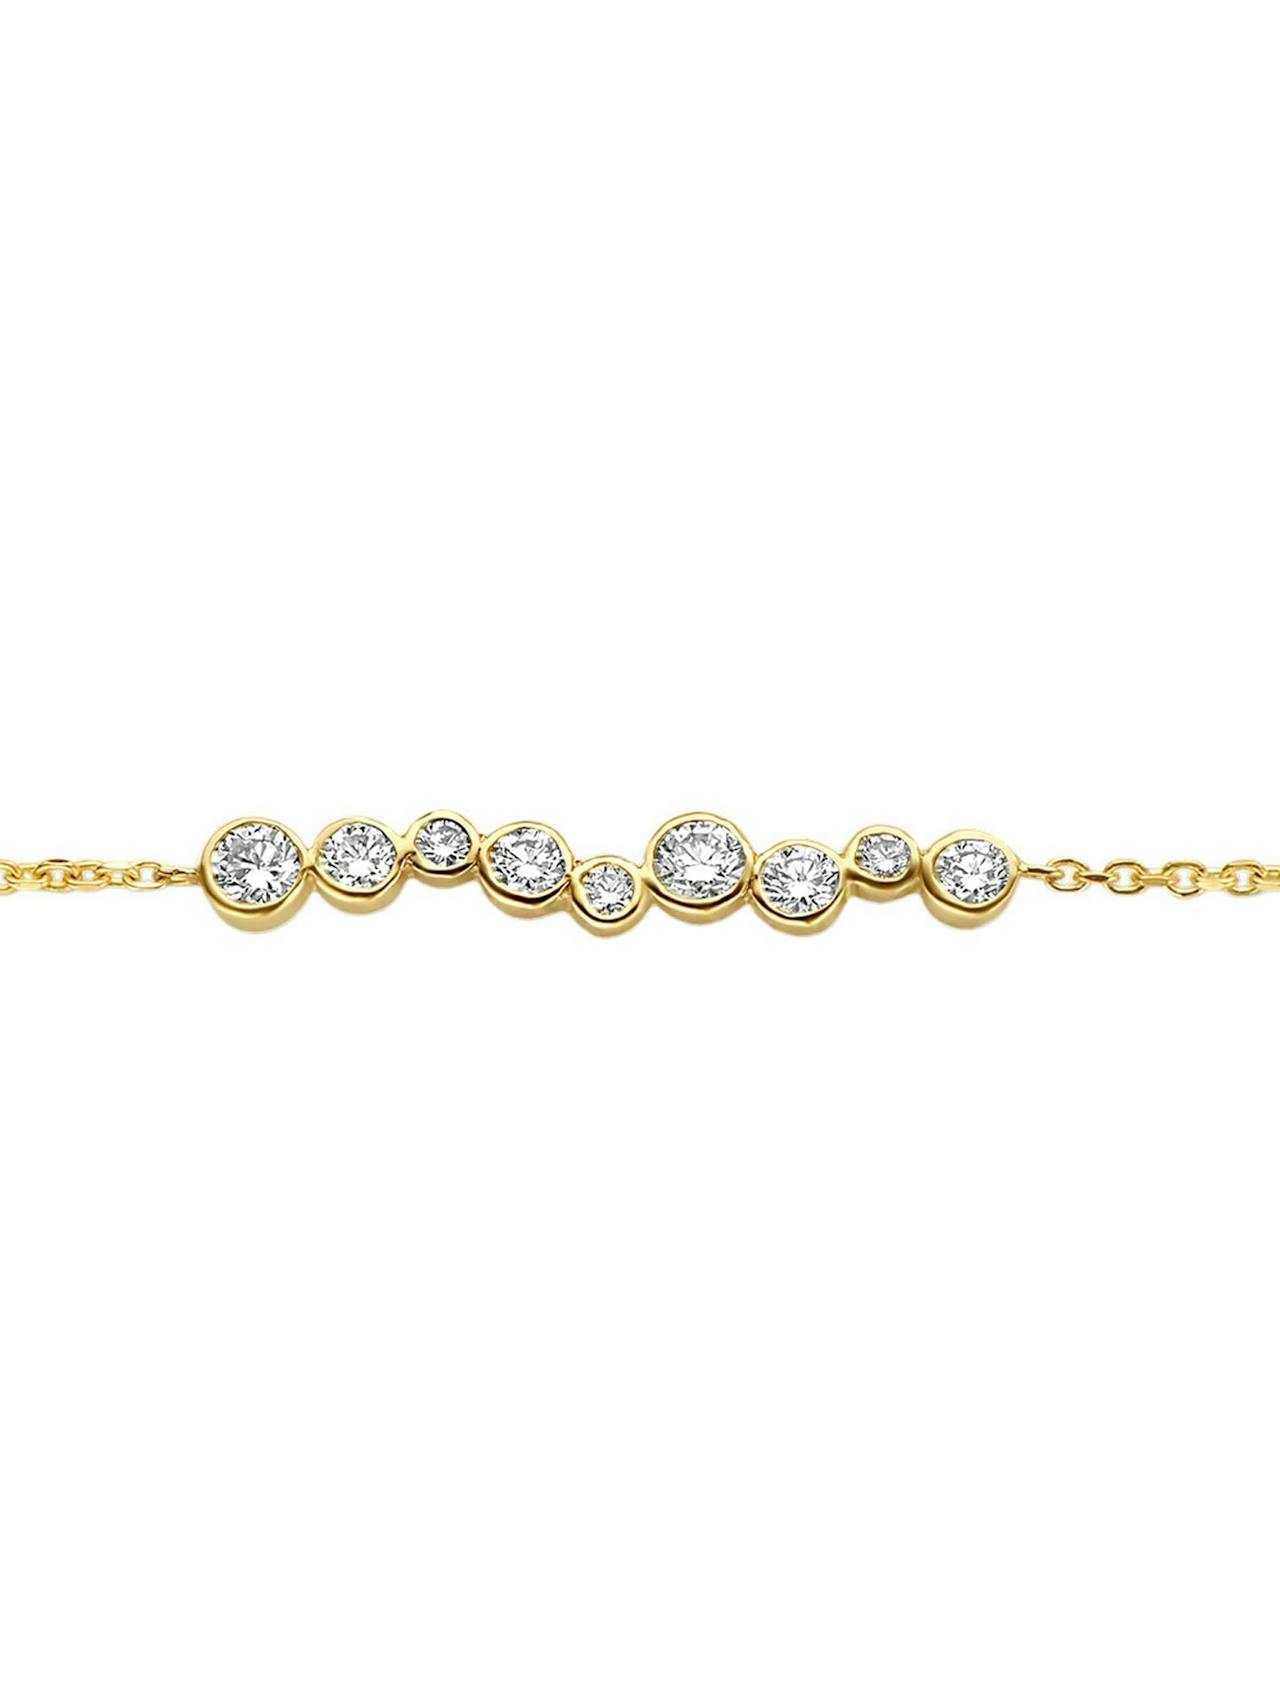 The chain cord made from 18k recycled solid gold, meets 9 circular diamond drops, also encased in 18k recycled solid gold. 